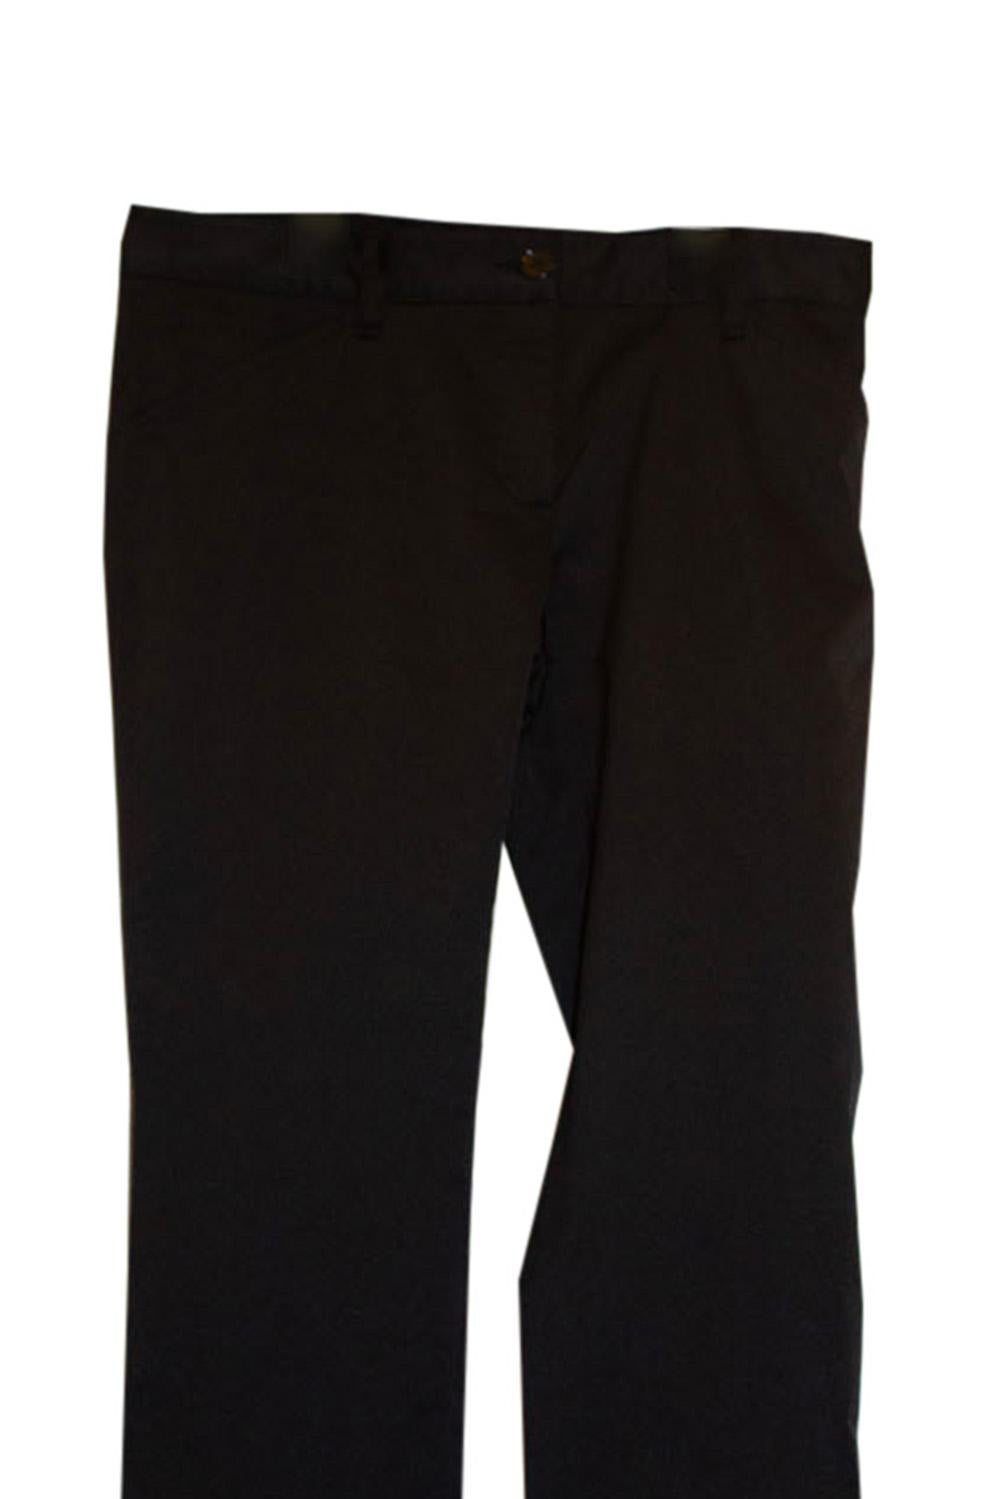 Dolce  and Gabbana Black Trousers For Sale 1